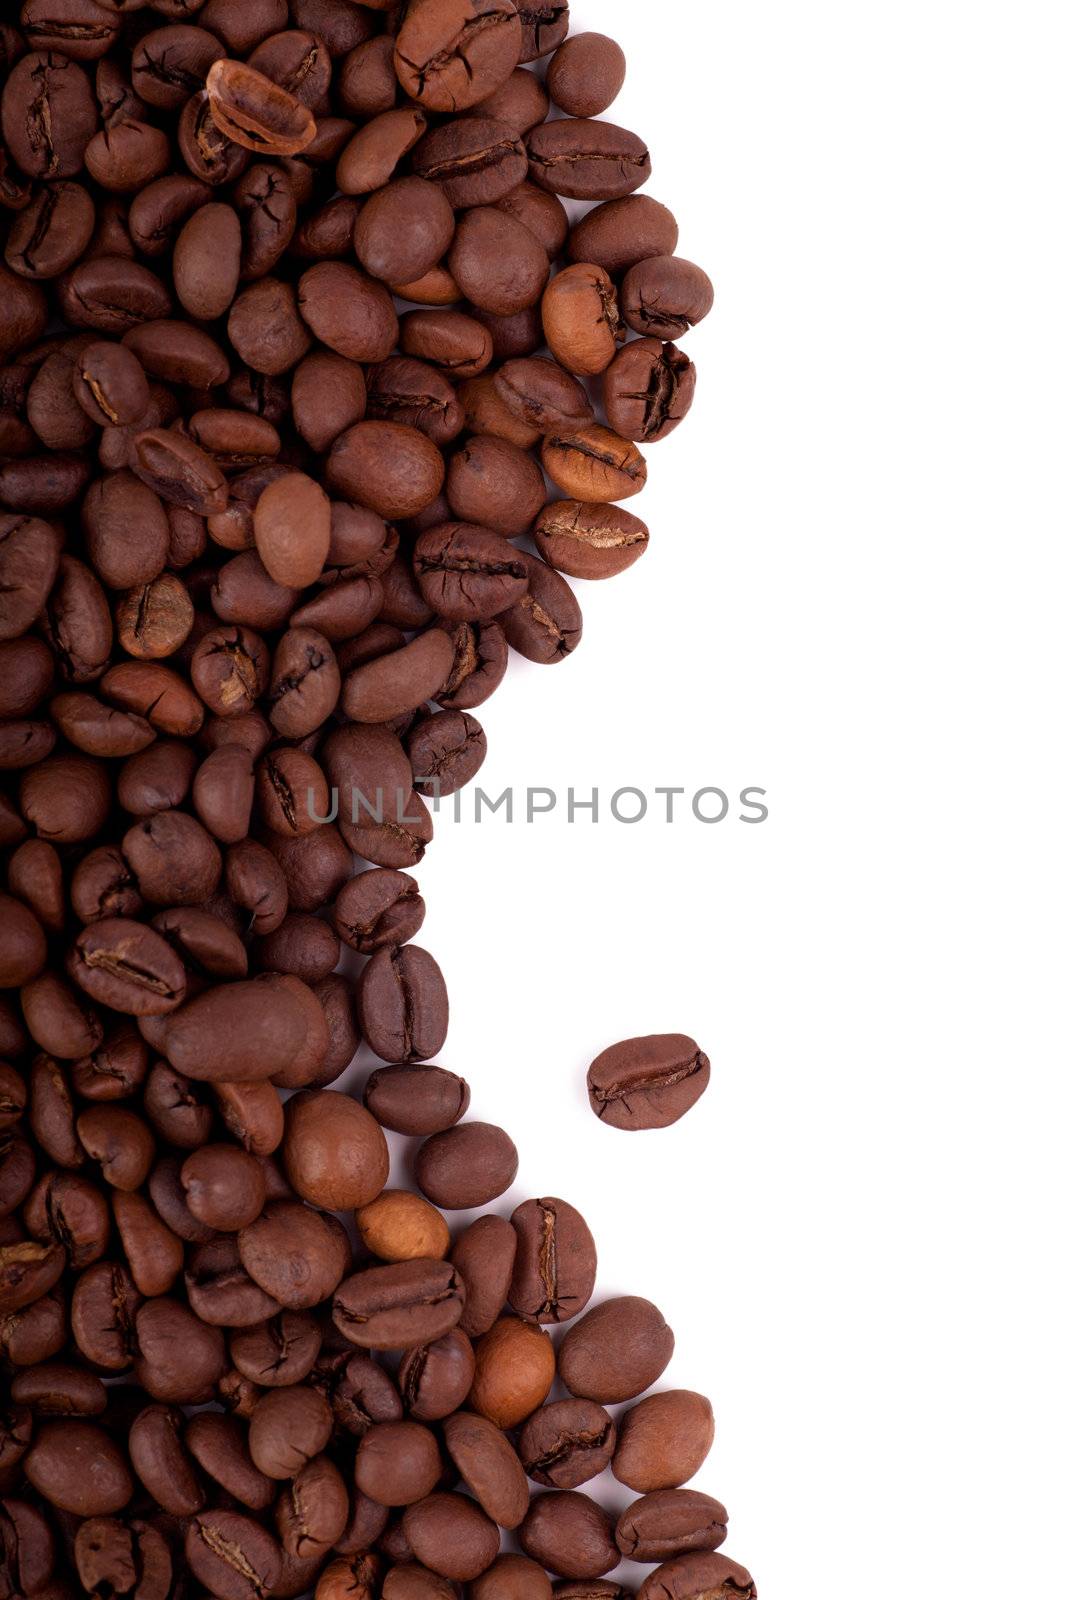 Roasted coffee beans over white background
